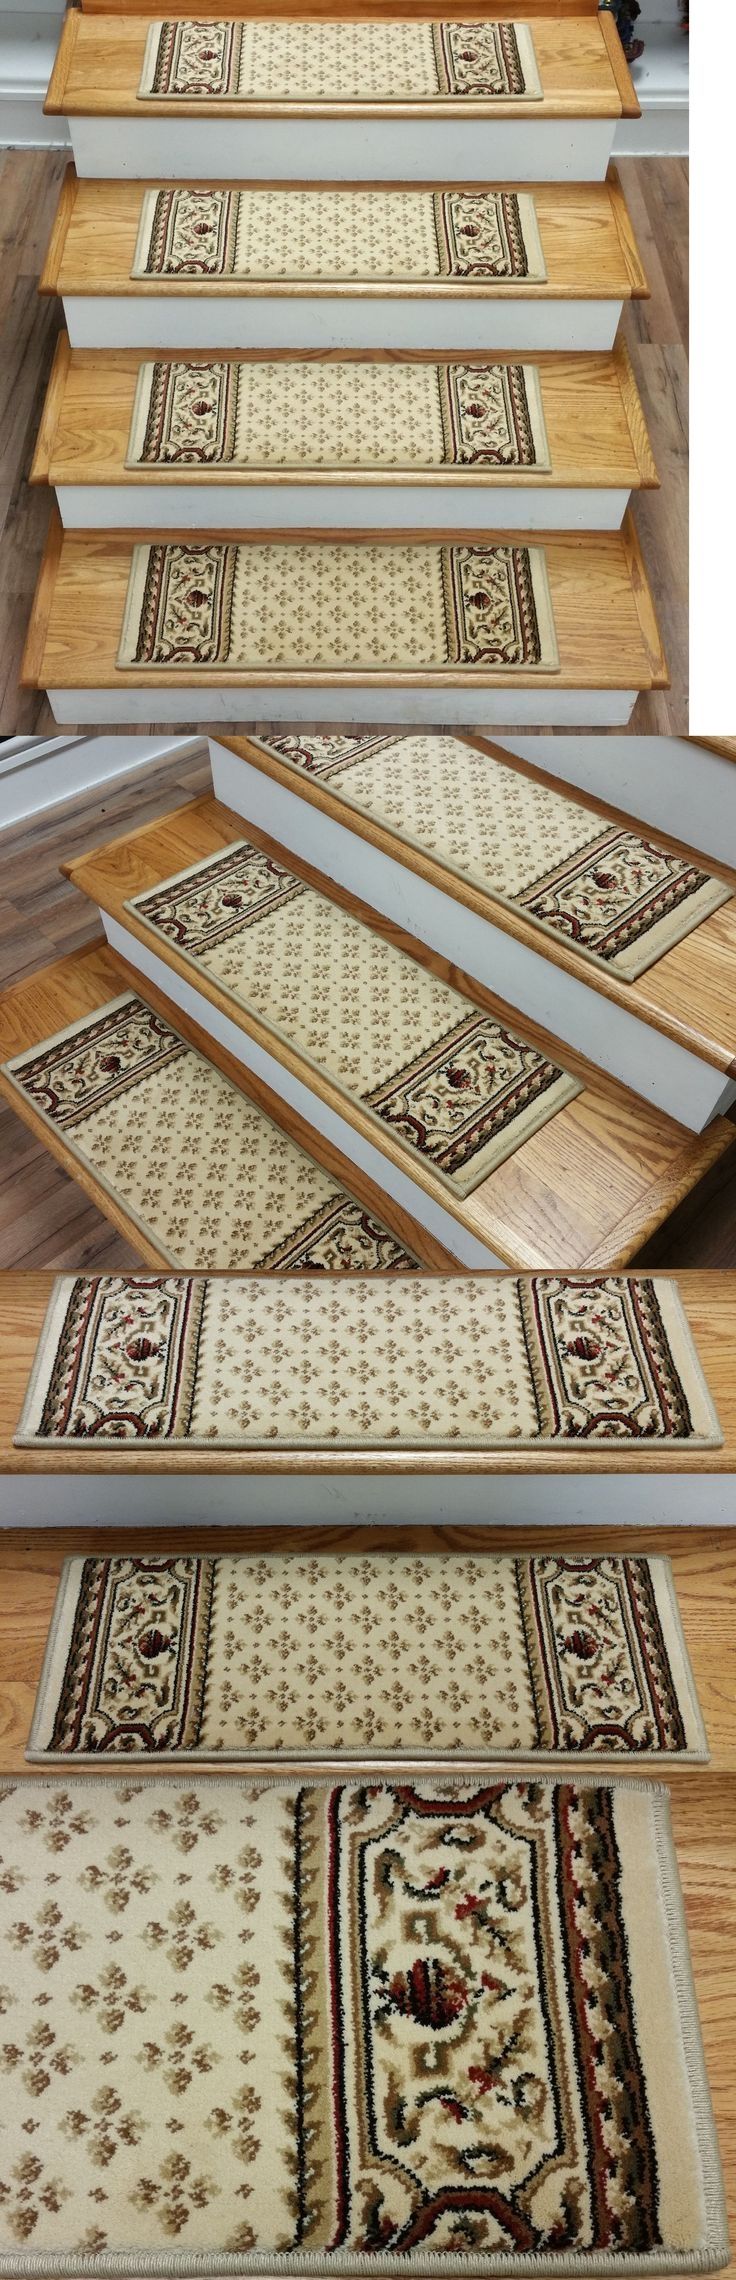 Best 25 Traditional Stair Tread Rugs Ideas Only On Pinterest Within Basket Weave Washable Indoor Stair Tread Rugs (View 16 of 20)